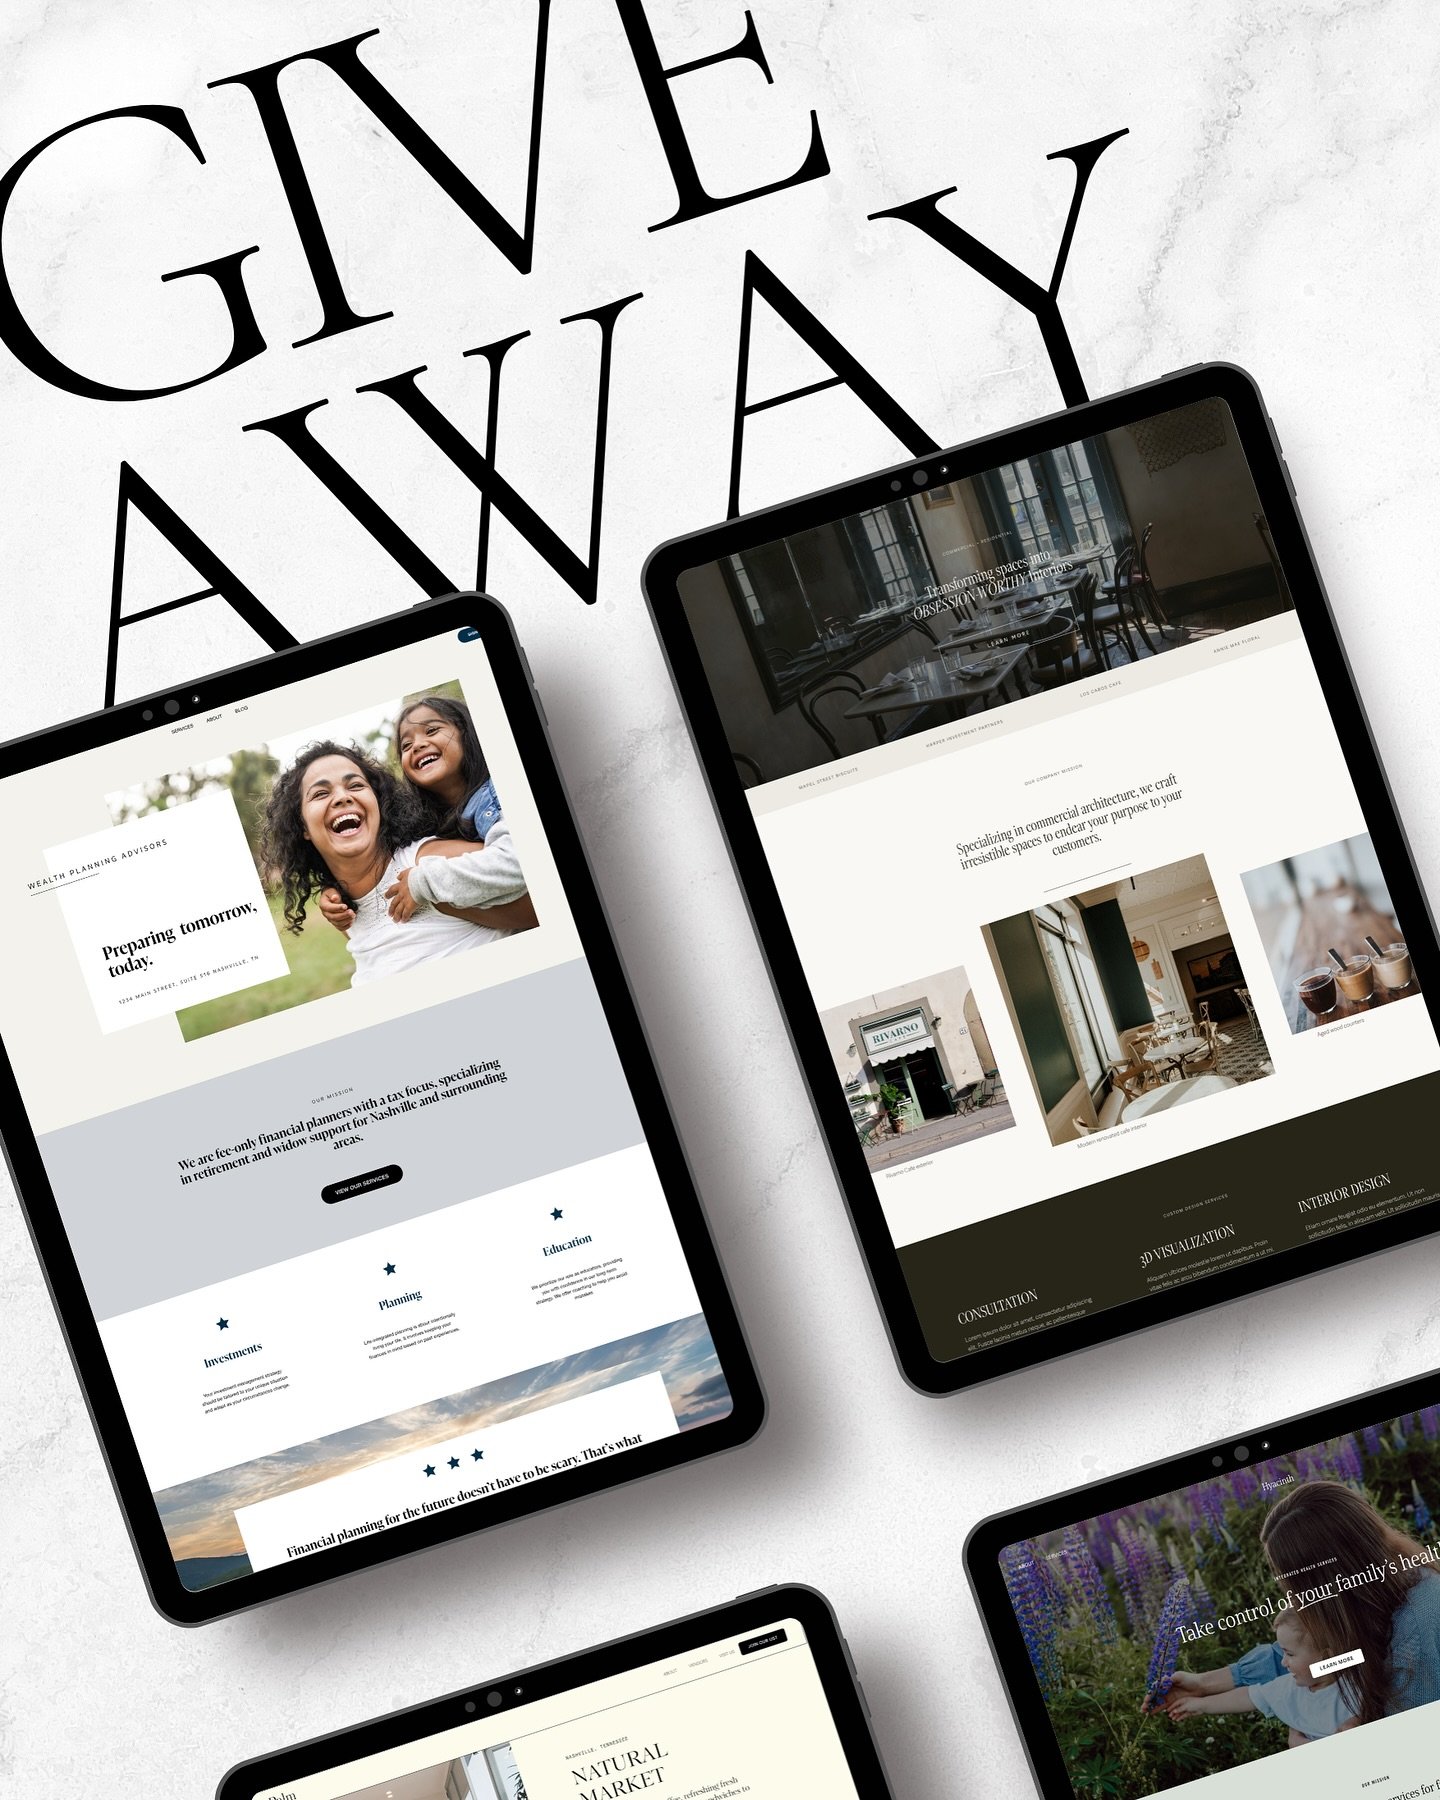 We&rsquo;ve got some exciting news for you! We&rsquo;re throwing a community celebration and want to give YOU a chance to win our brand new Semi-Custom Squarespace Website service.

Get ready to shine with a stunning website that&rsquo;s tailored to 